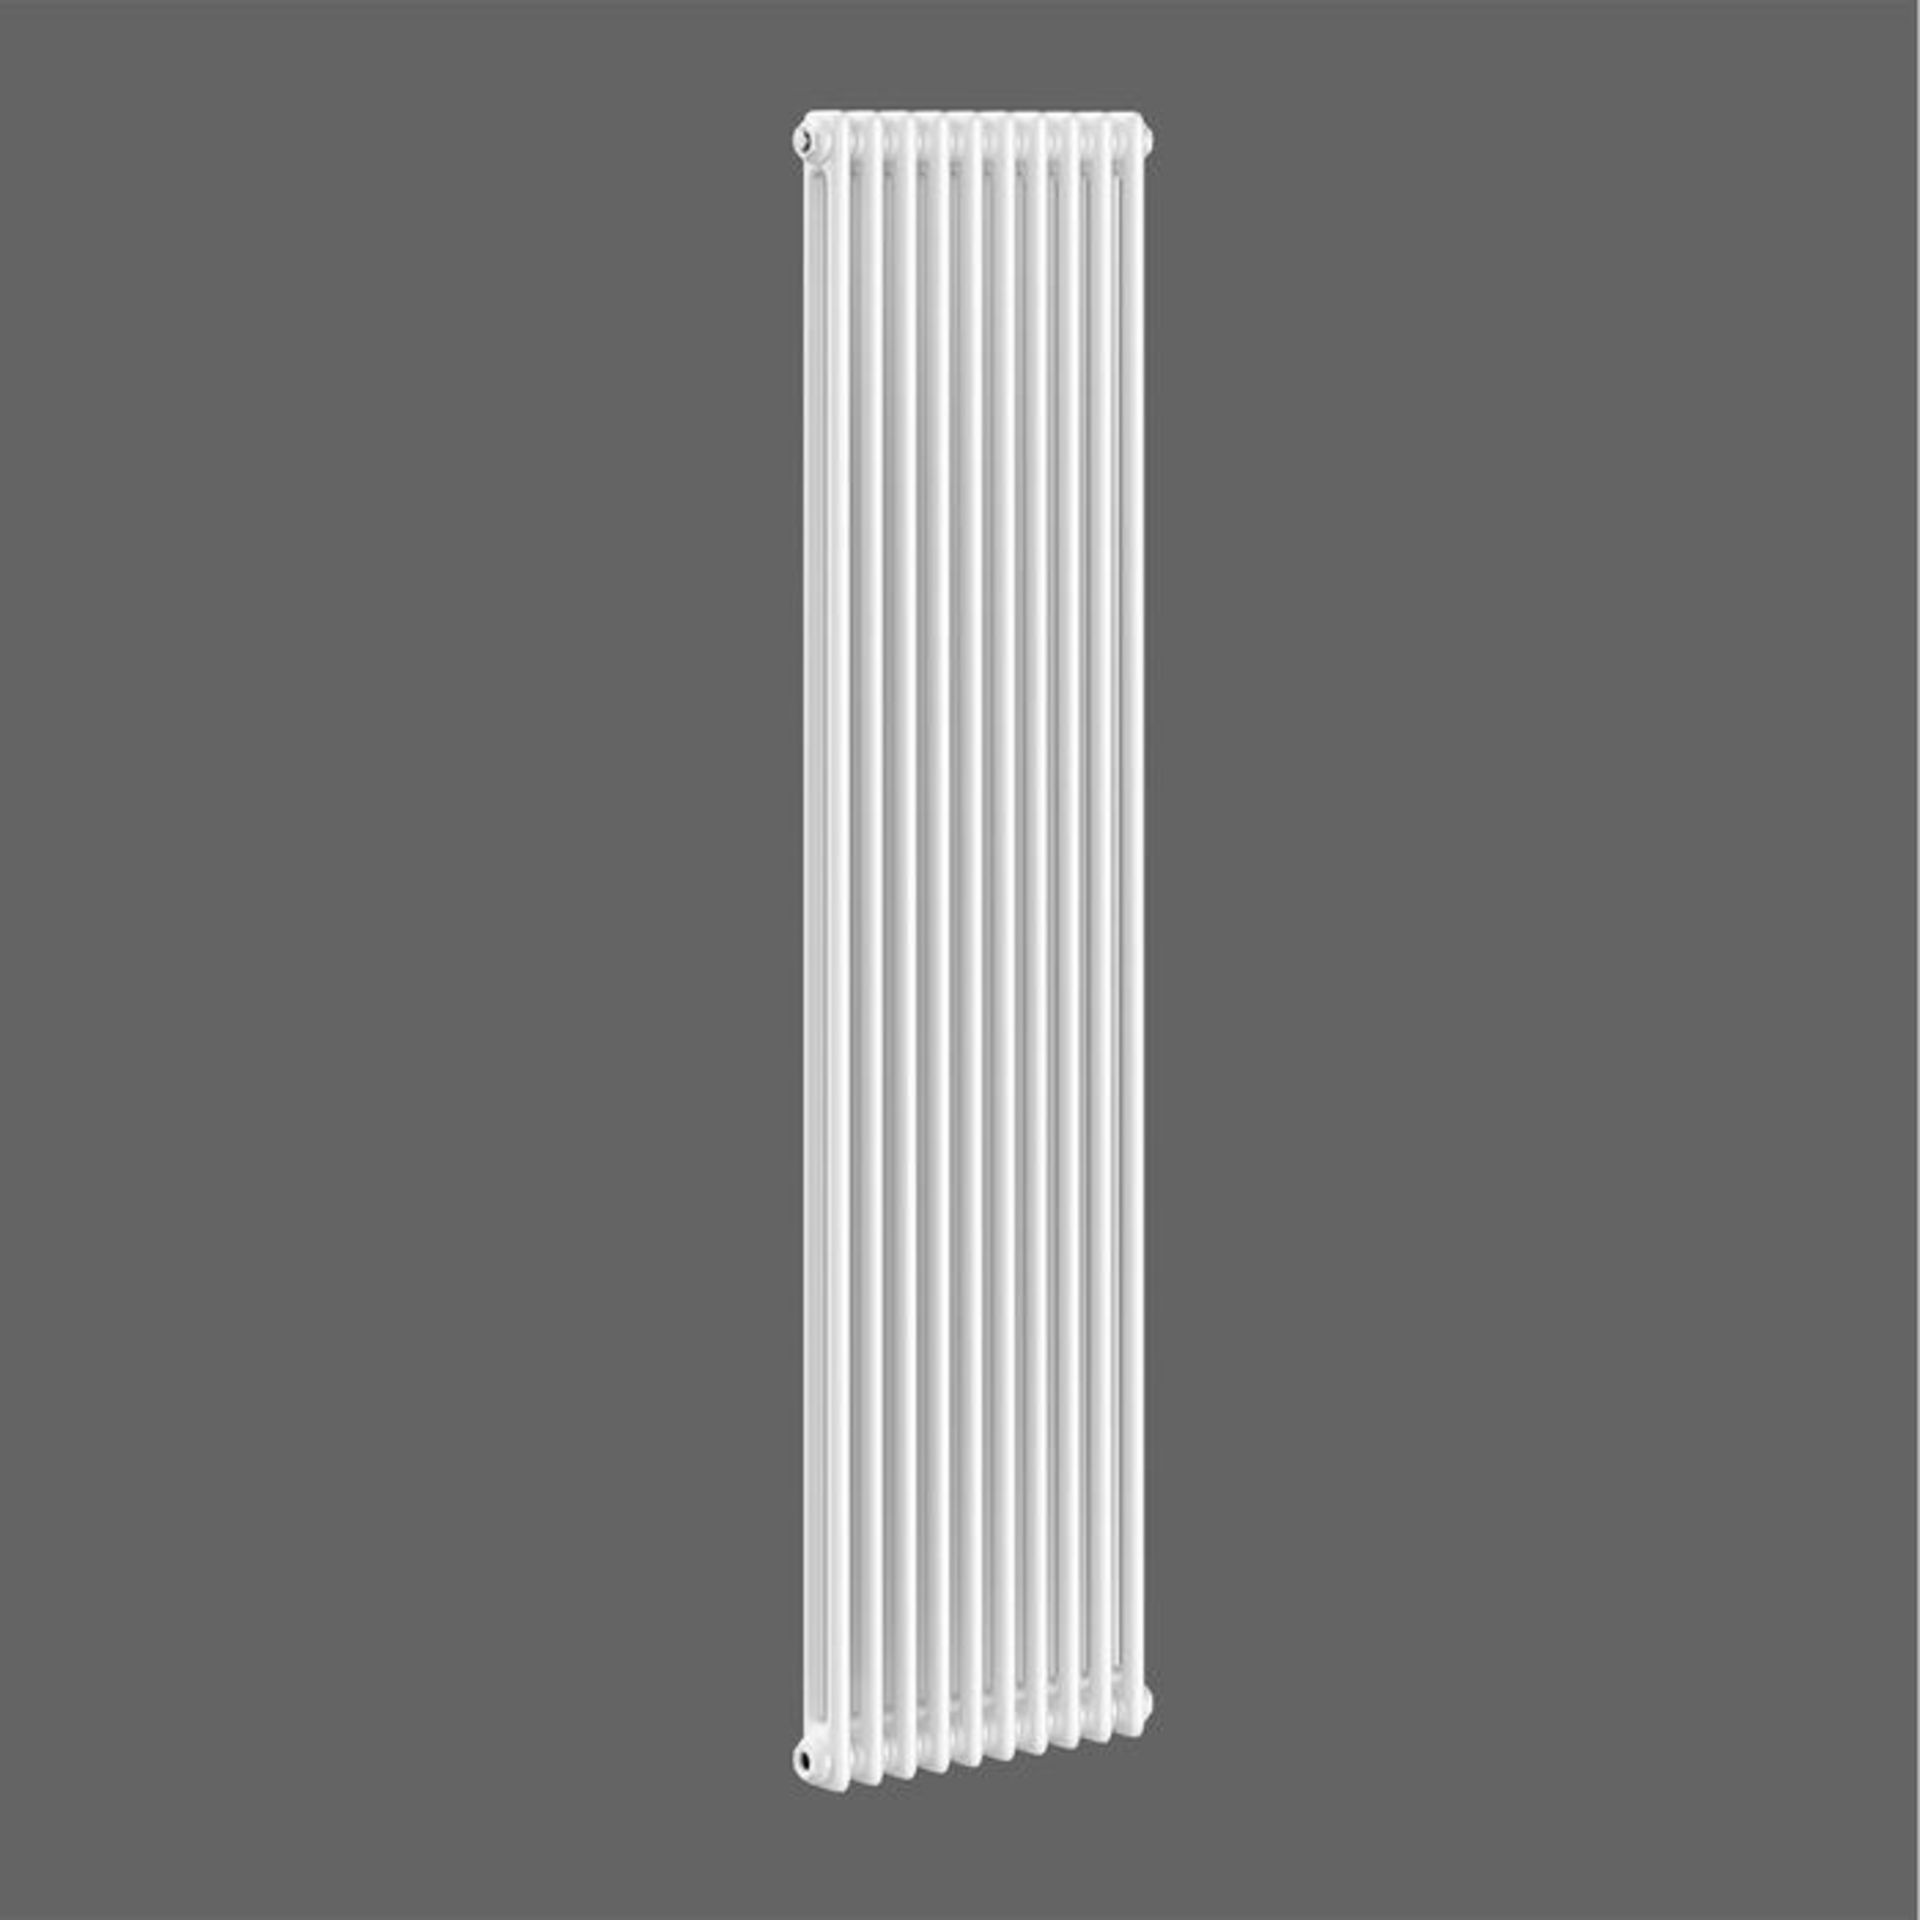 (PP134) 2000x490mm White Double Panel Vertical Colosseum Traditional Radiator. RRP £488.99. M... - Image 3 of 3